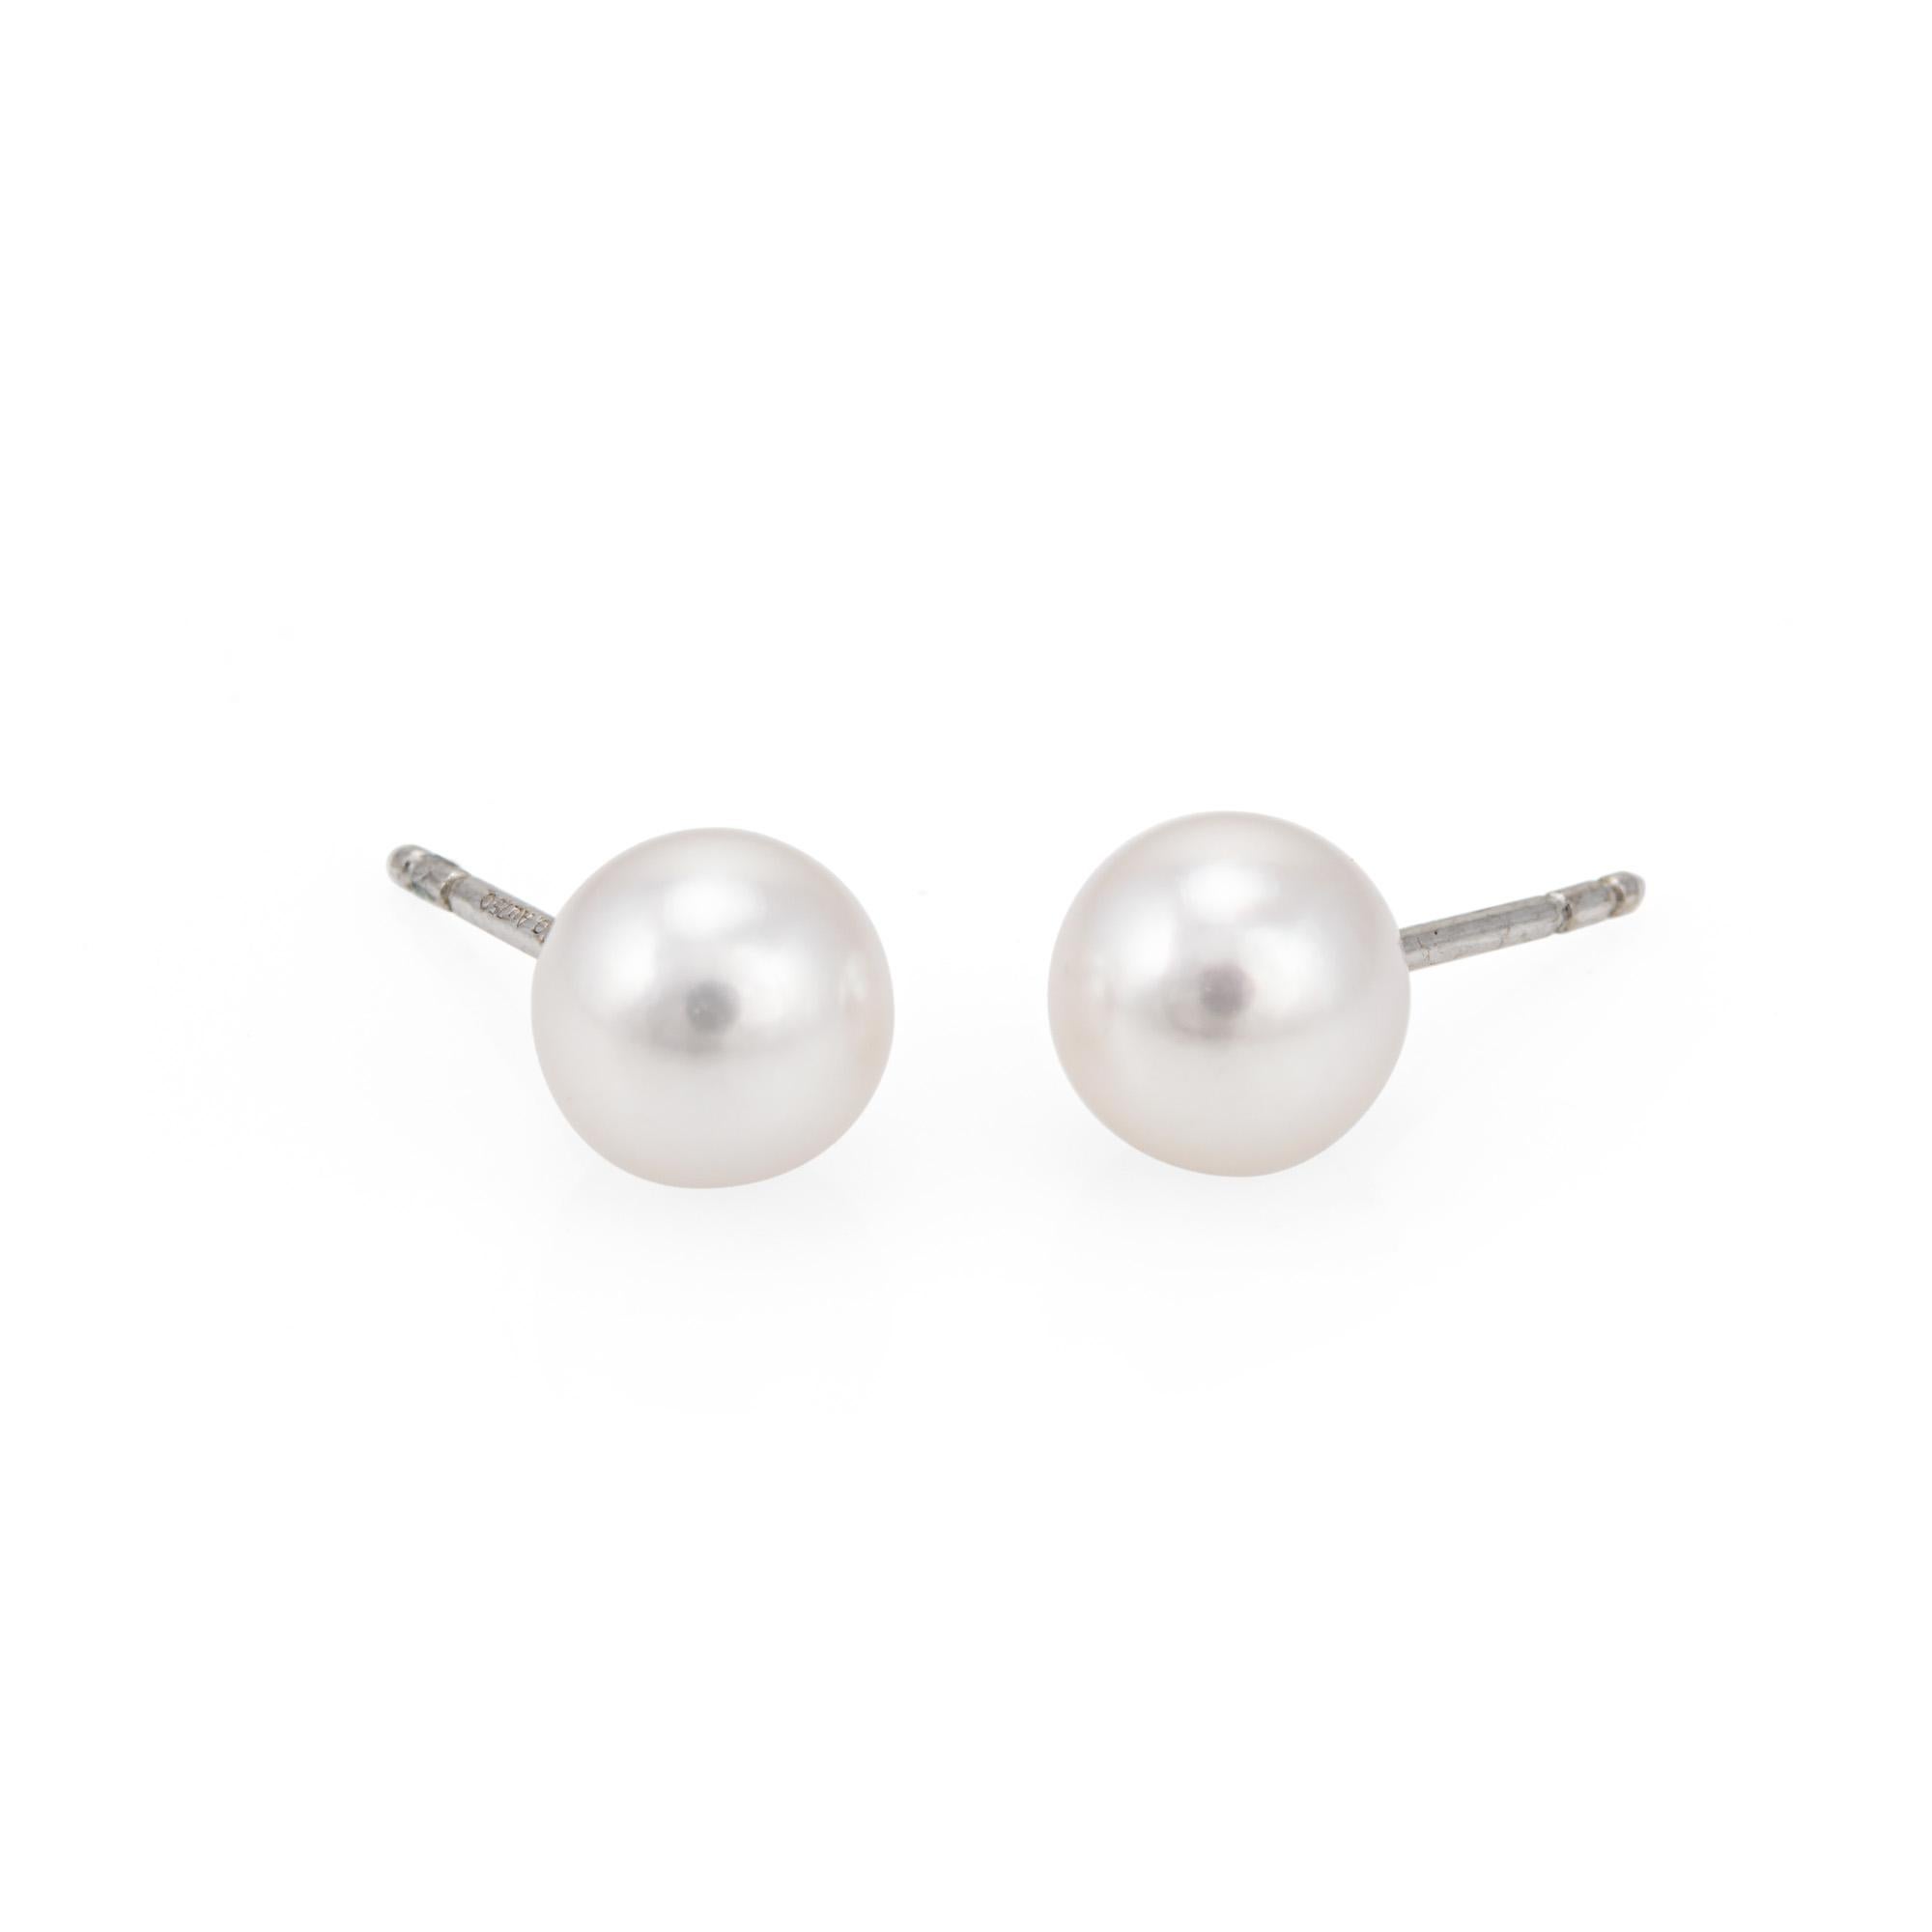 Pair of estate Tiffany & Co signature pearl earrings crafted in 18k white gold. 

Two Akoya cultured pearls measure 7mm. The pearls are in very good condition and free of cracks or chips, exhibiting excellent luster and rose overtones. 

The stylish